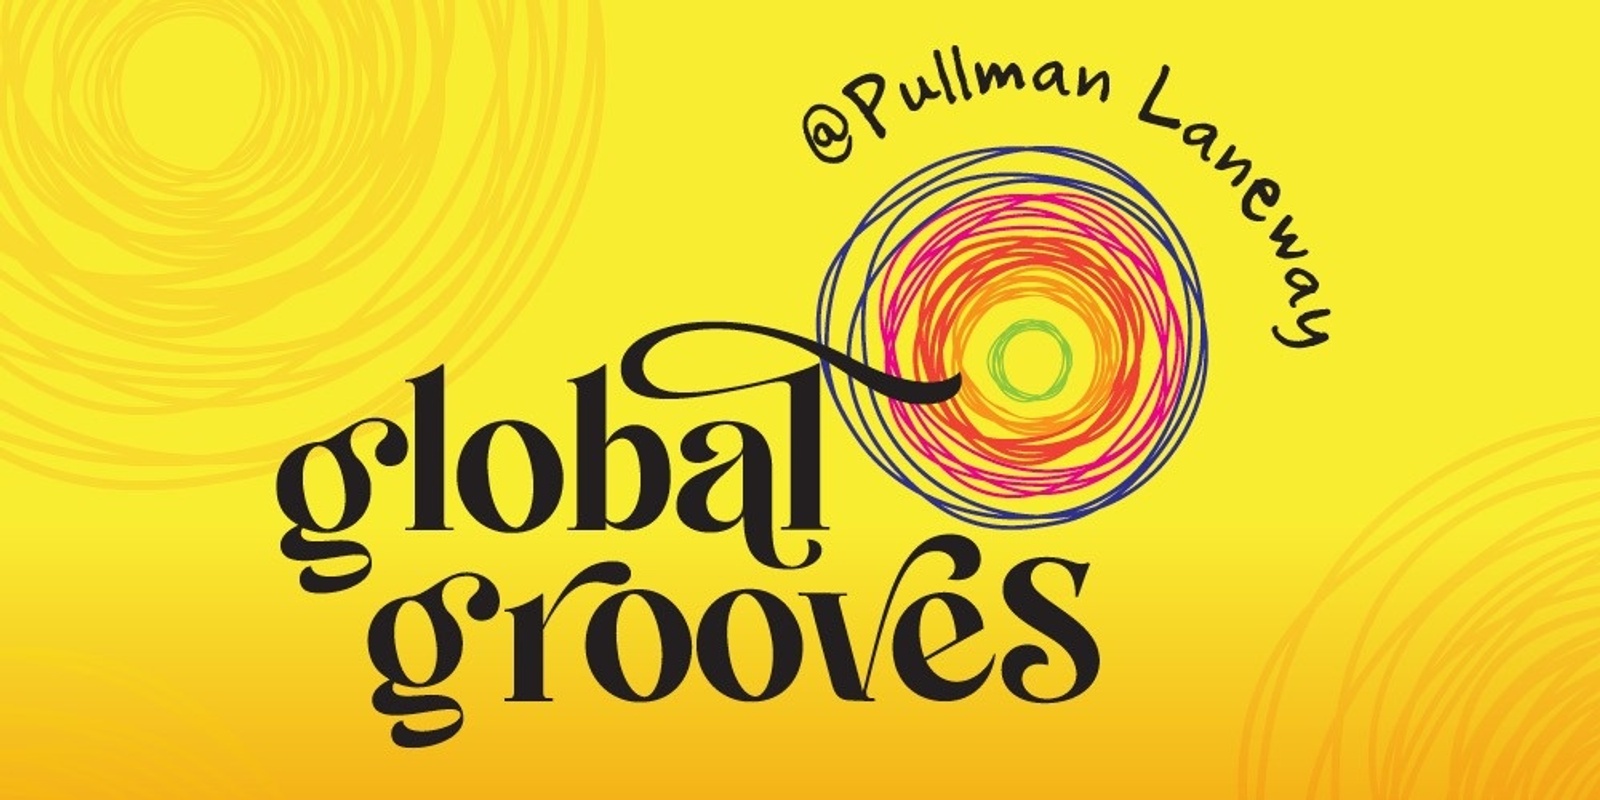 Banner image for Global Grooves @ Pullman Laneway